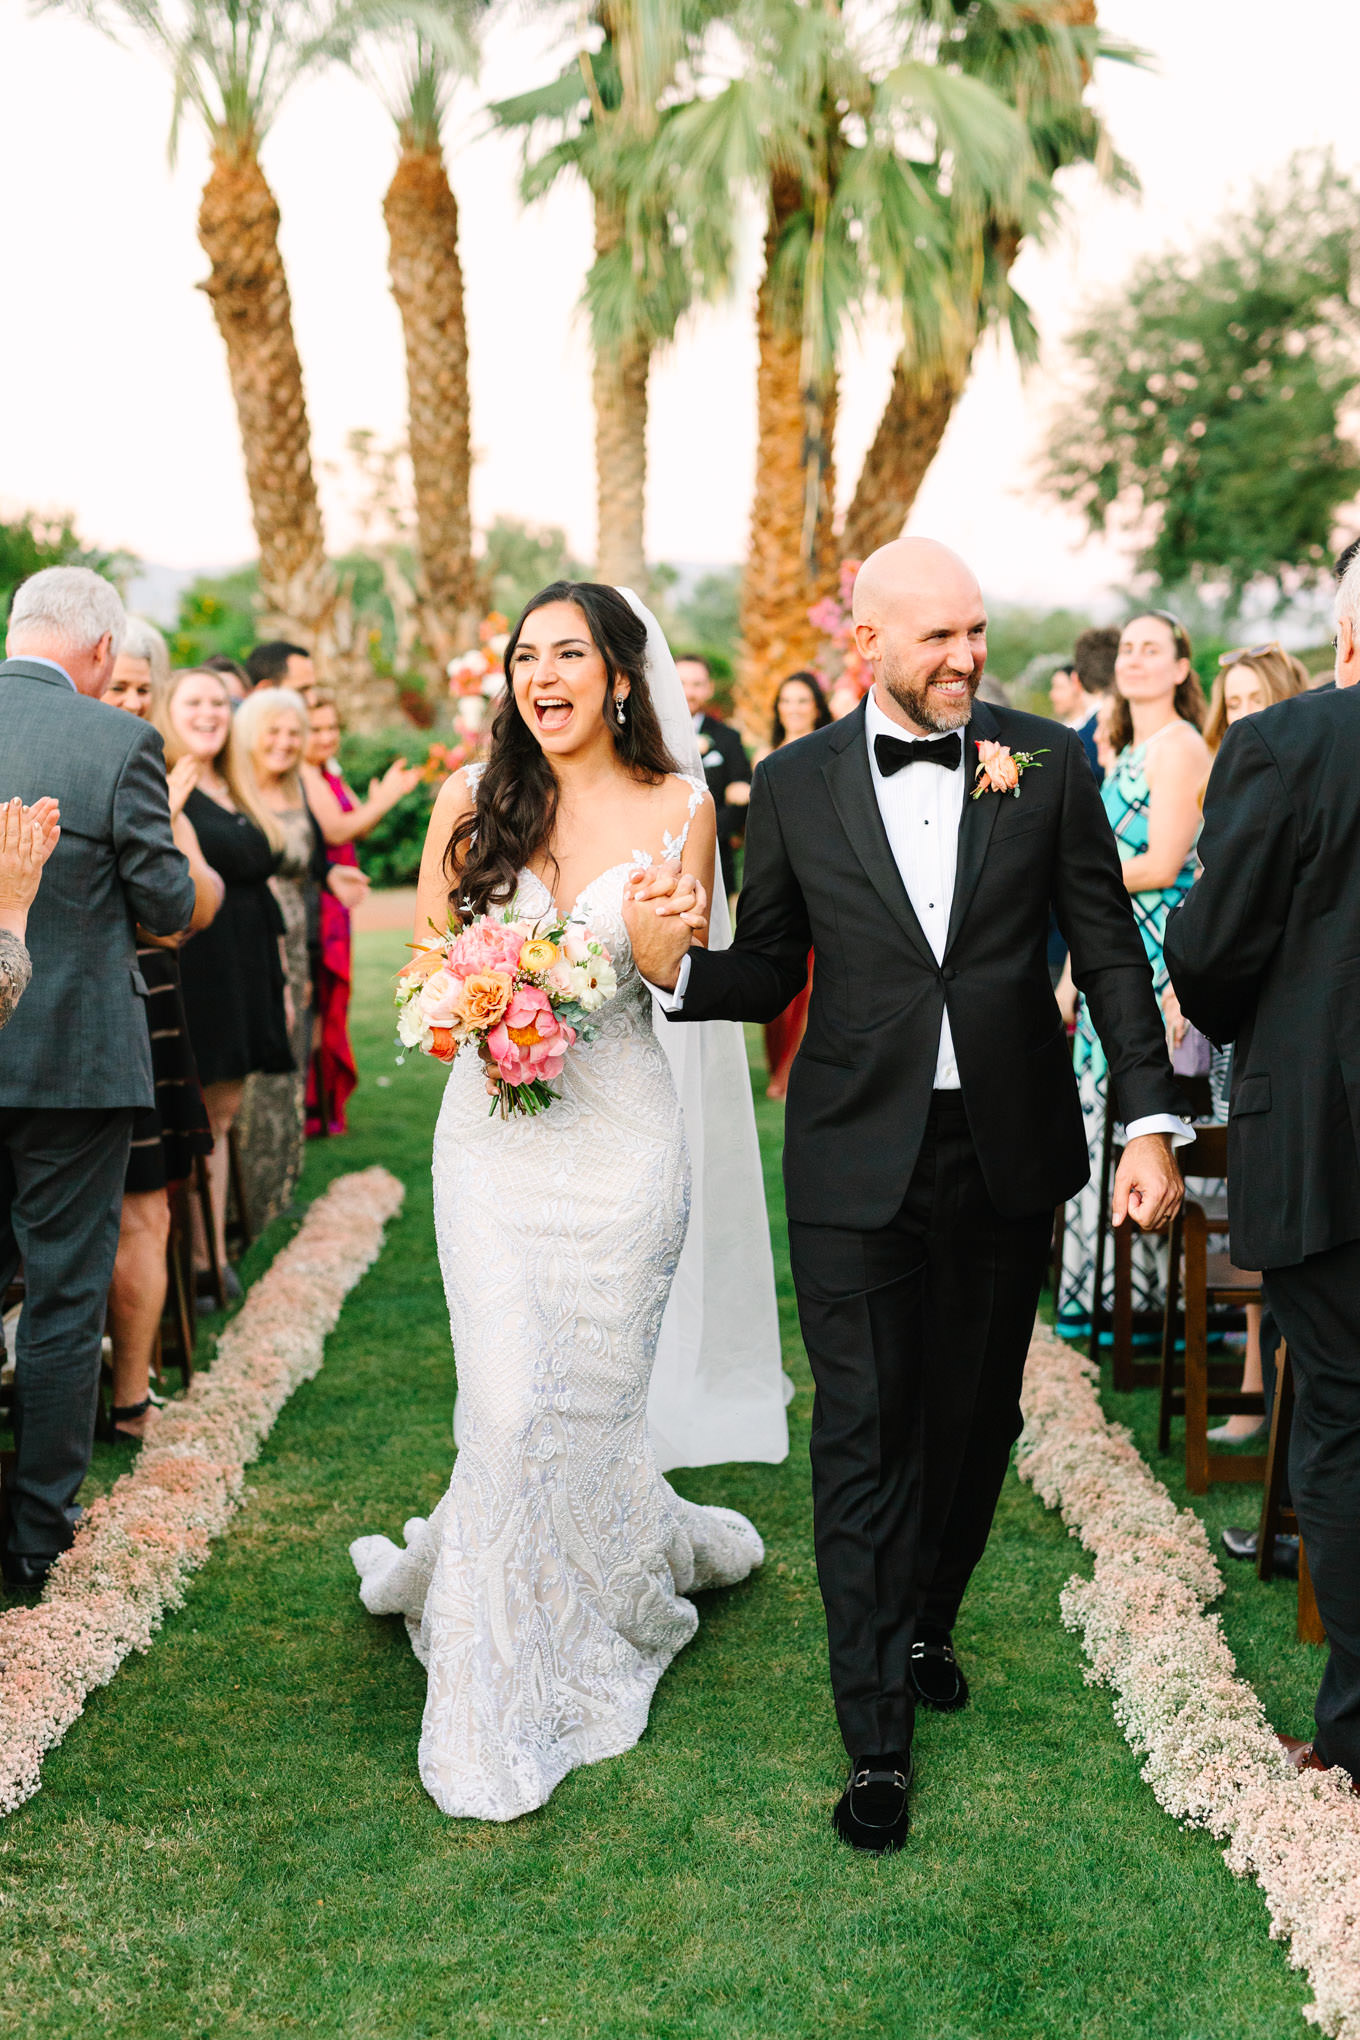 Couple after ceremony | Pink Bougainvillea Estate wedding | Colorful LA wedding photography | #bougainvilleaestate #palmspringswedding #palmspringsweddingvenue #palmspringsphotographer Source: Mary Costa Photography | Los Angeles